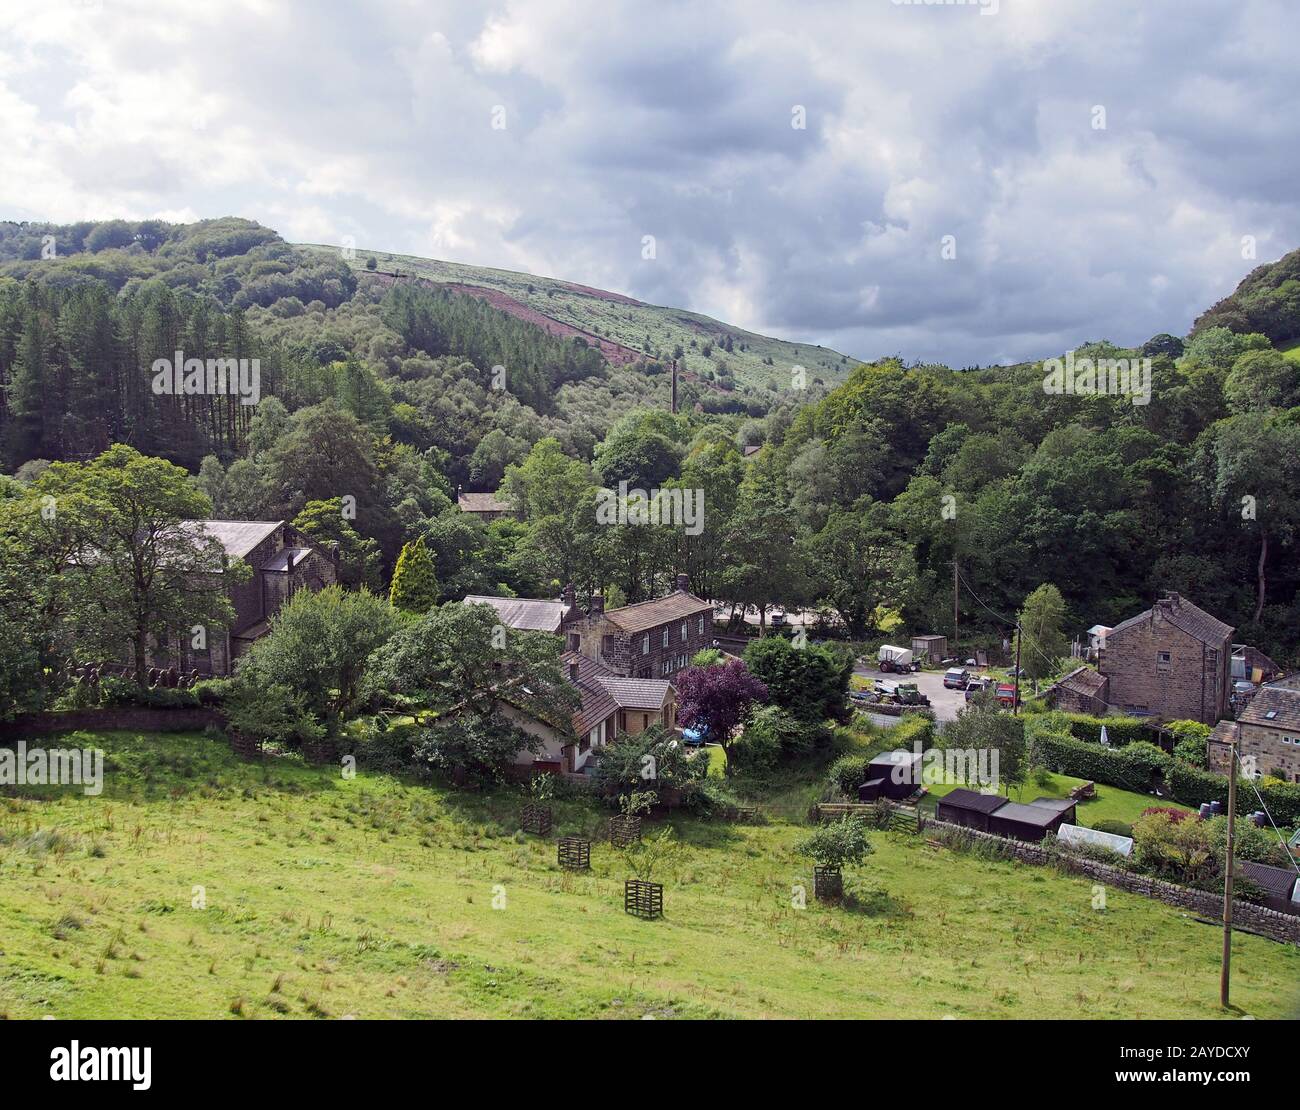 the small village of cragg vale in west yorkshire surrounded by pennine hills and trees Stock Photo